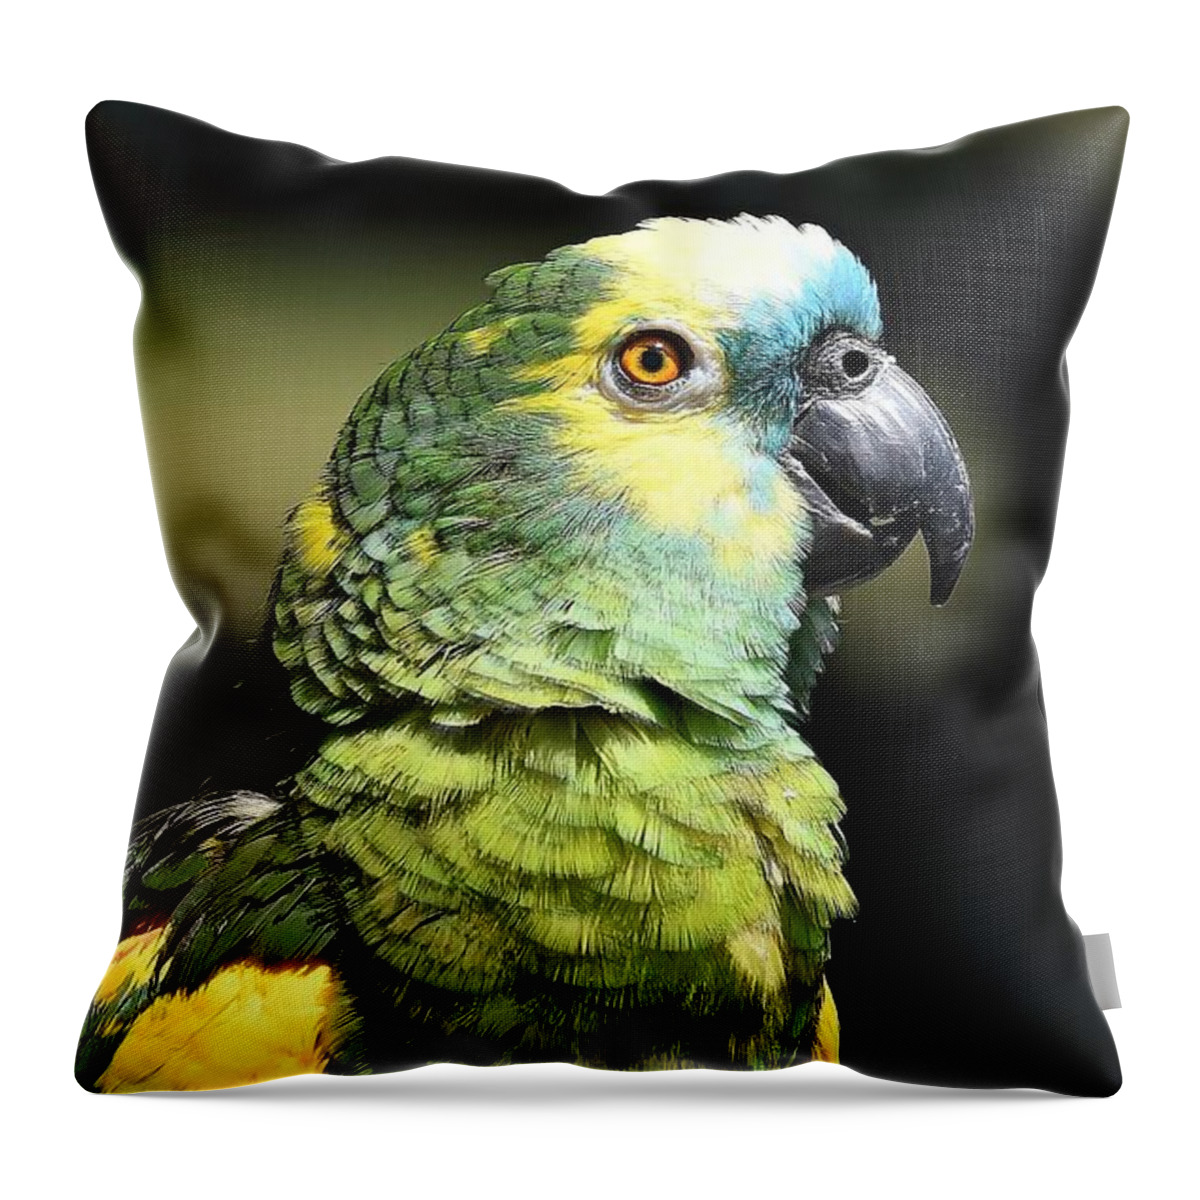 Blue Fronted Amazon Parrot Throw Pillow featuring the photograph Amazon Beauty by Fraida Gutovich